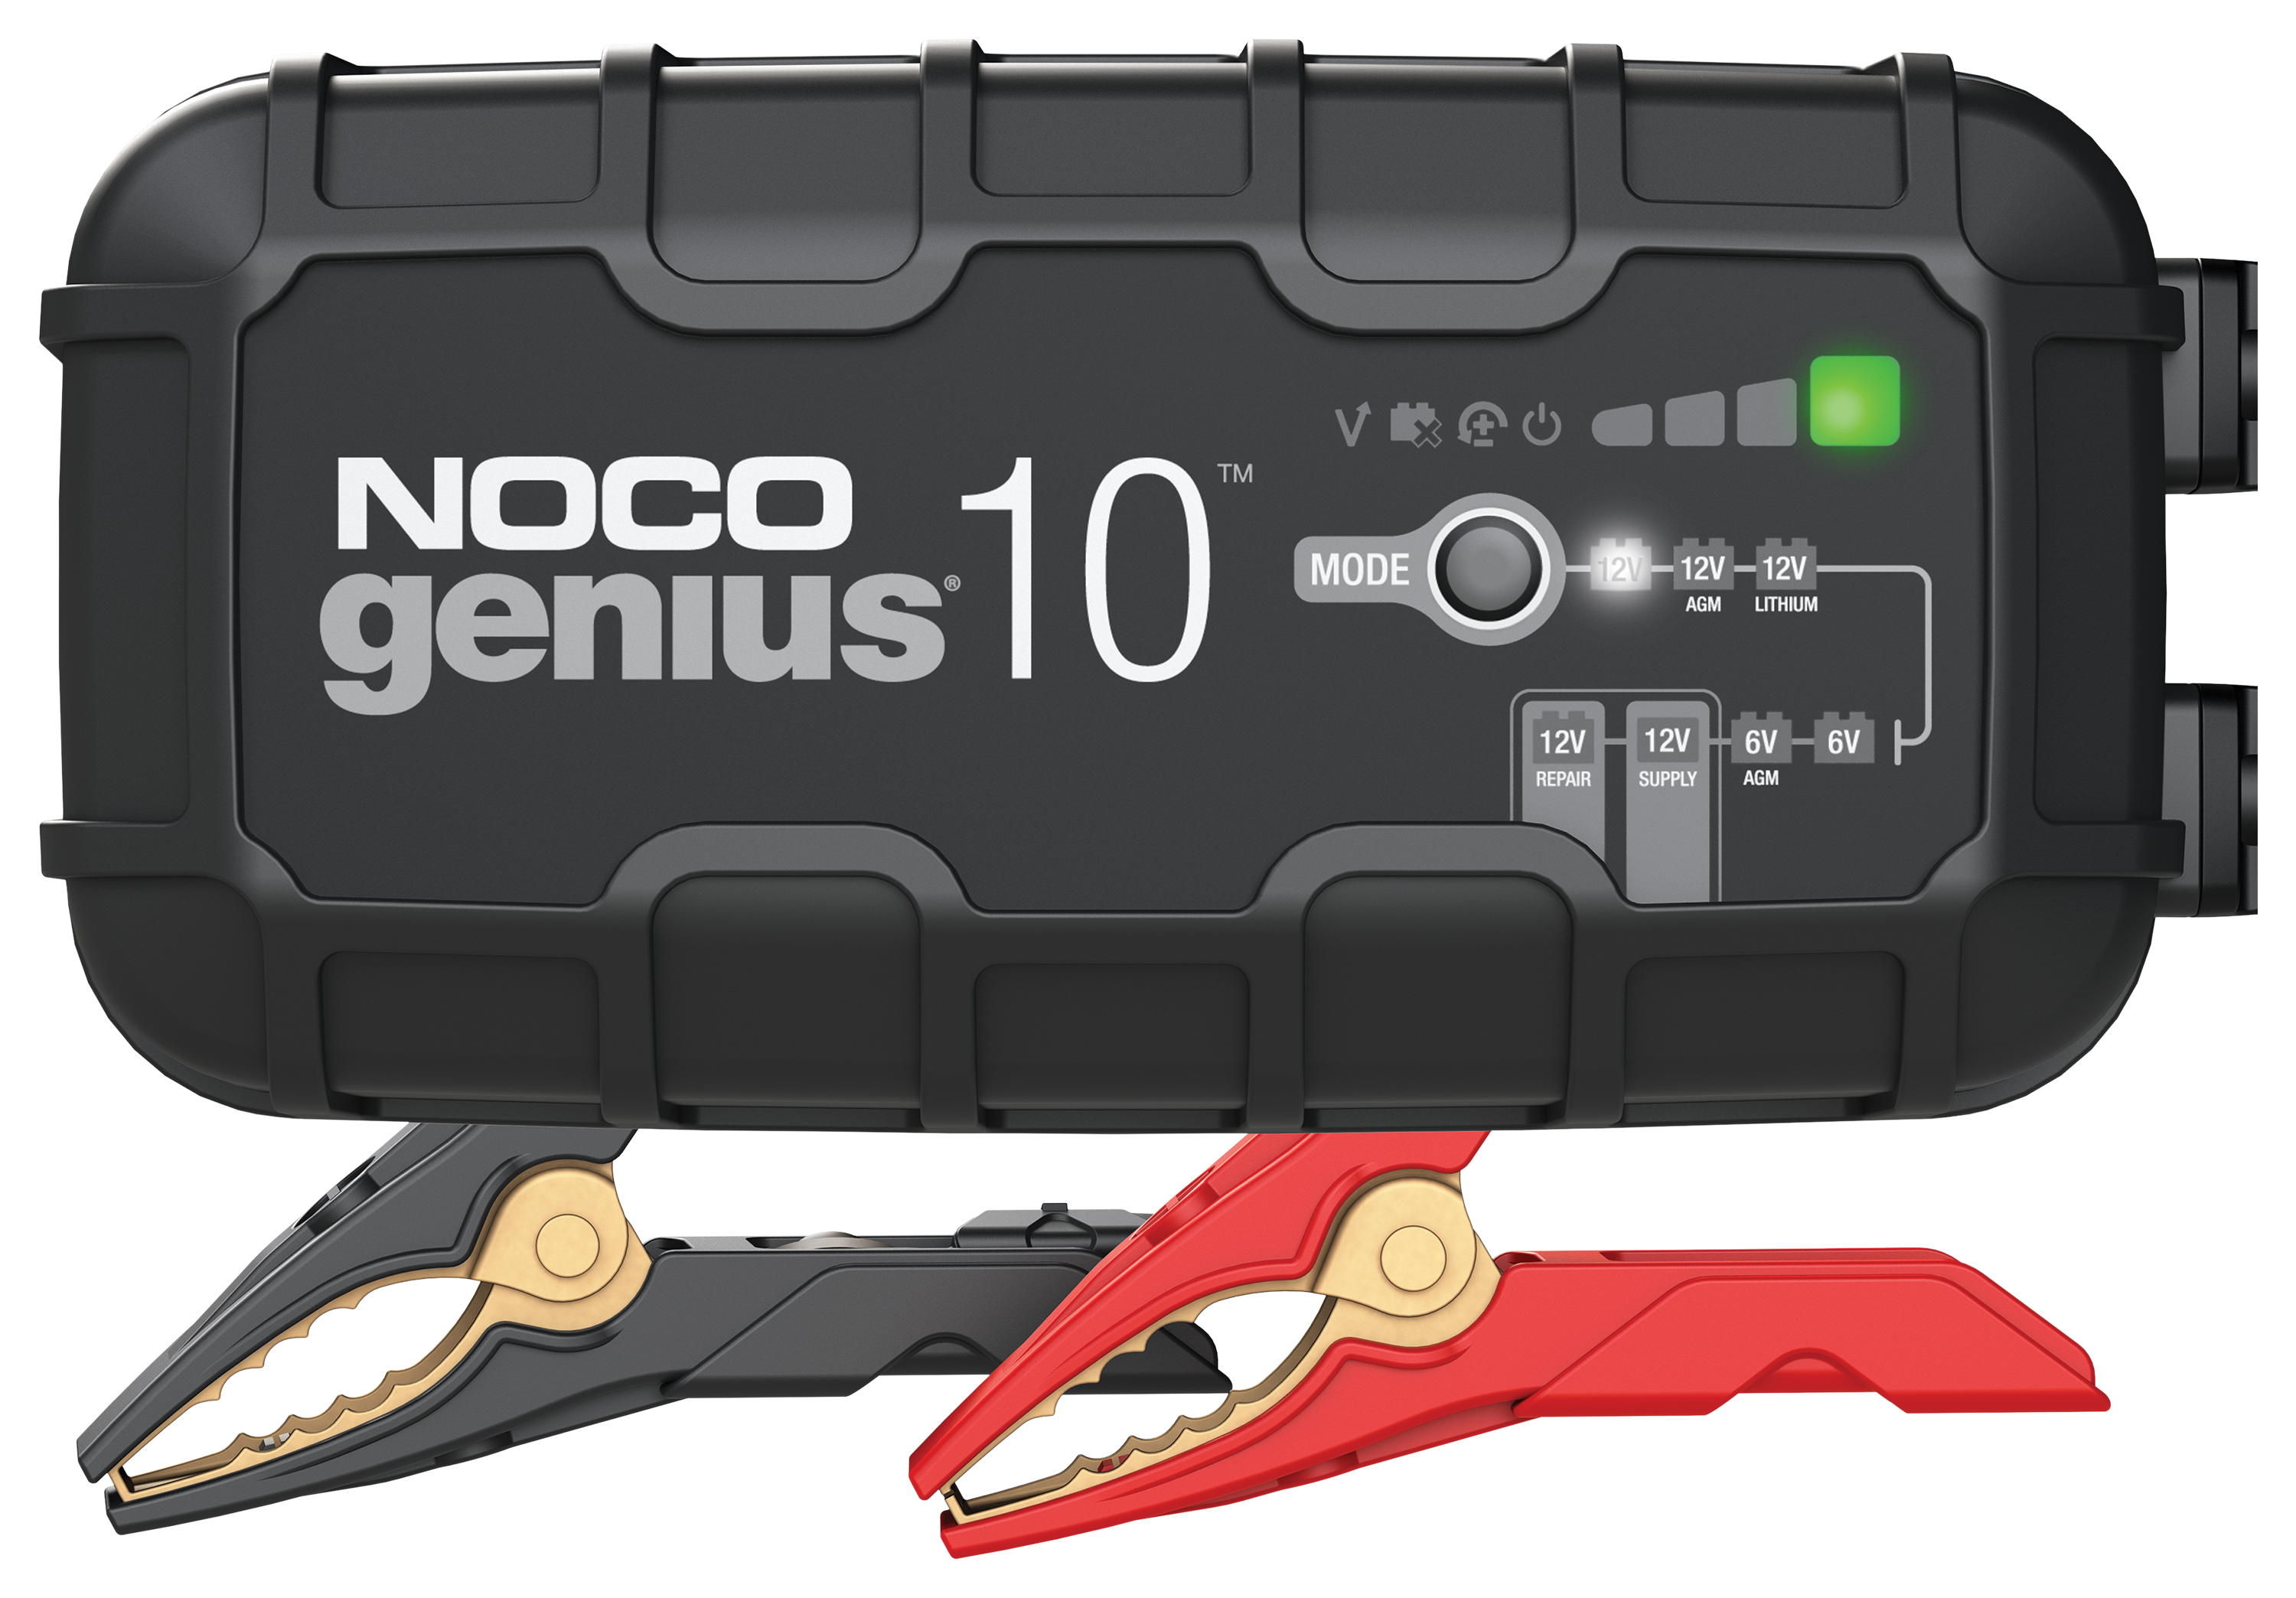 NOCO GENIUS10 6V/12V 5A Smart Battery Charger, Maintainer, and Desulfator